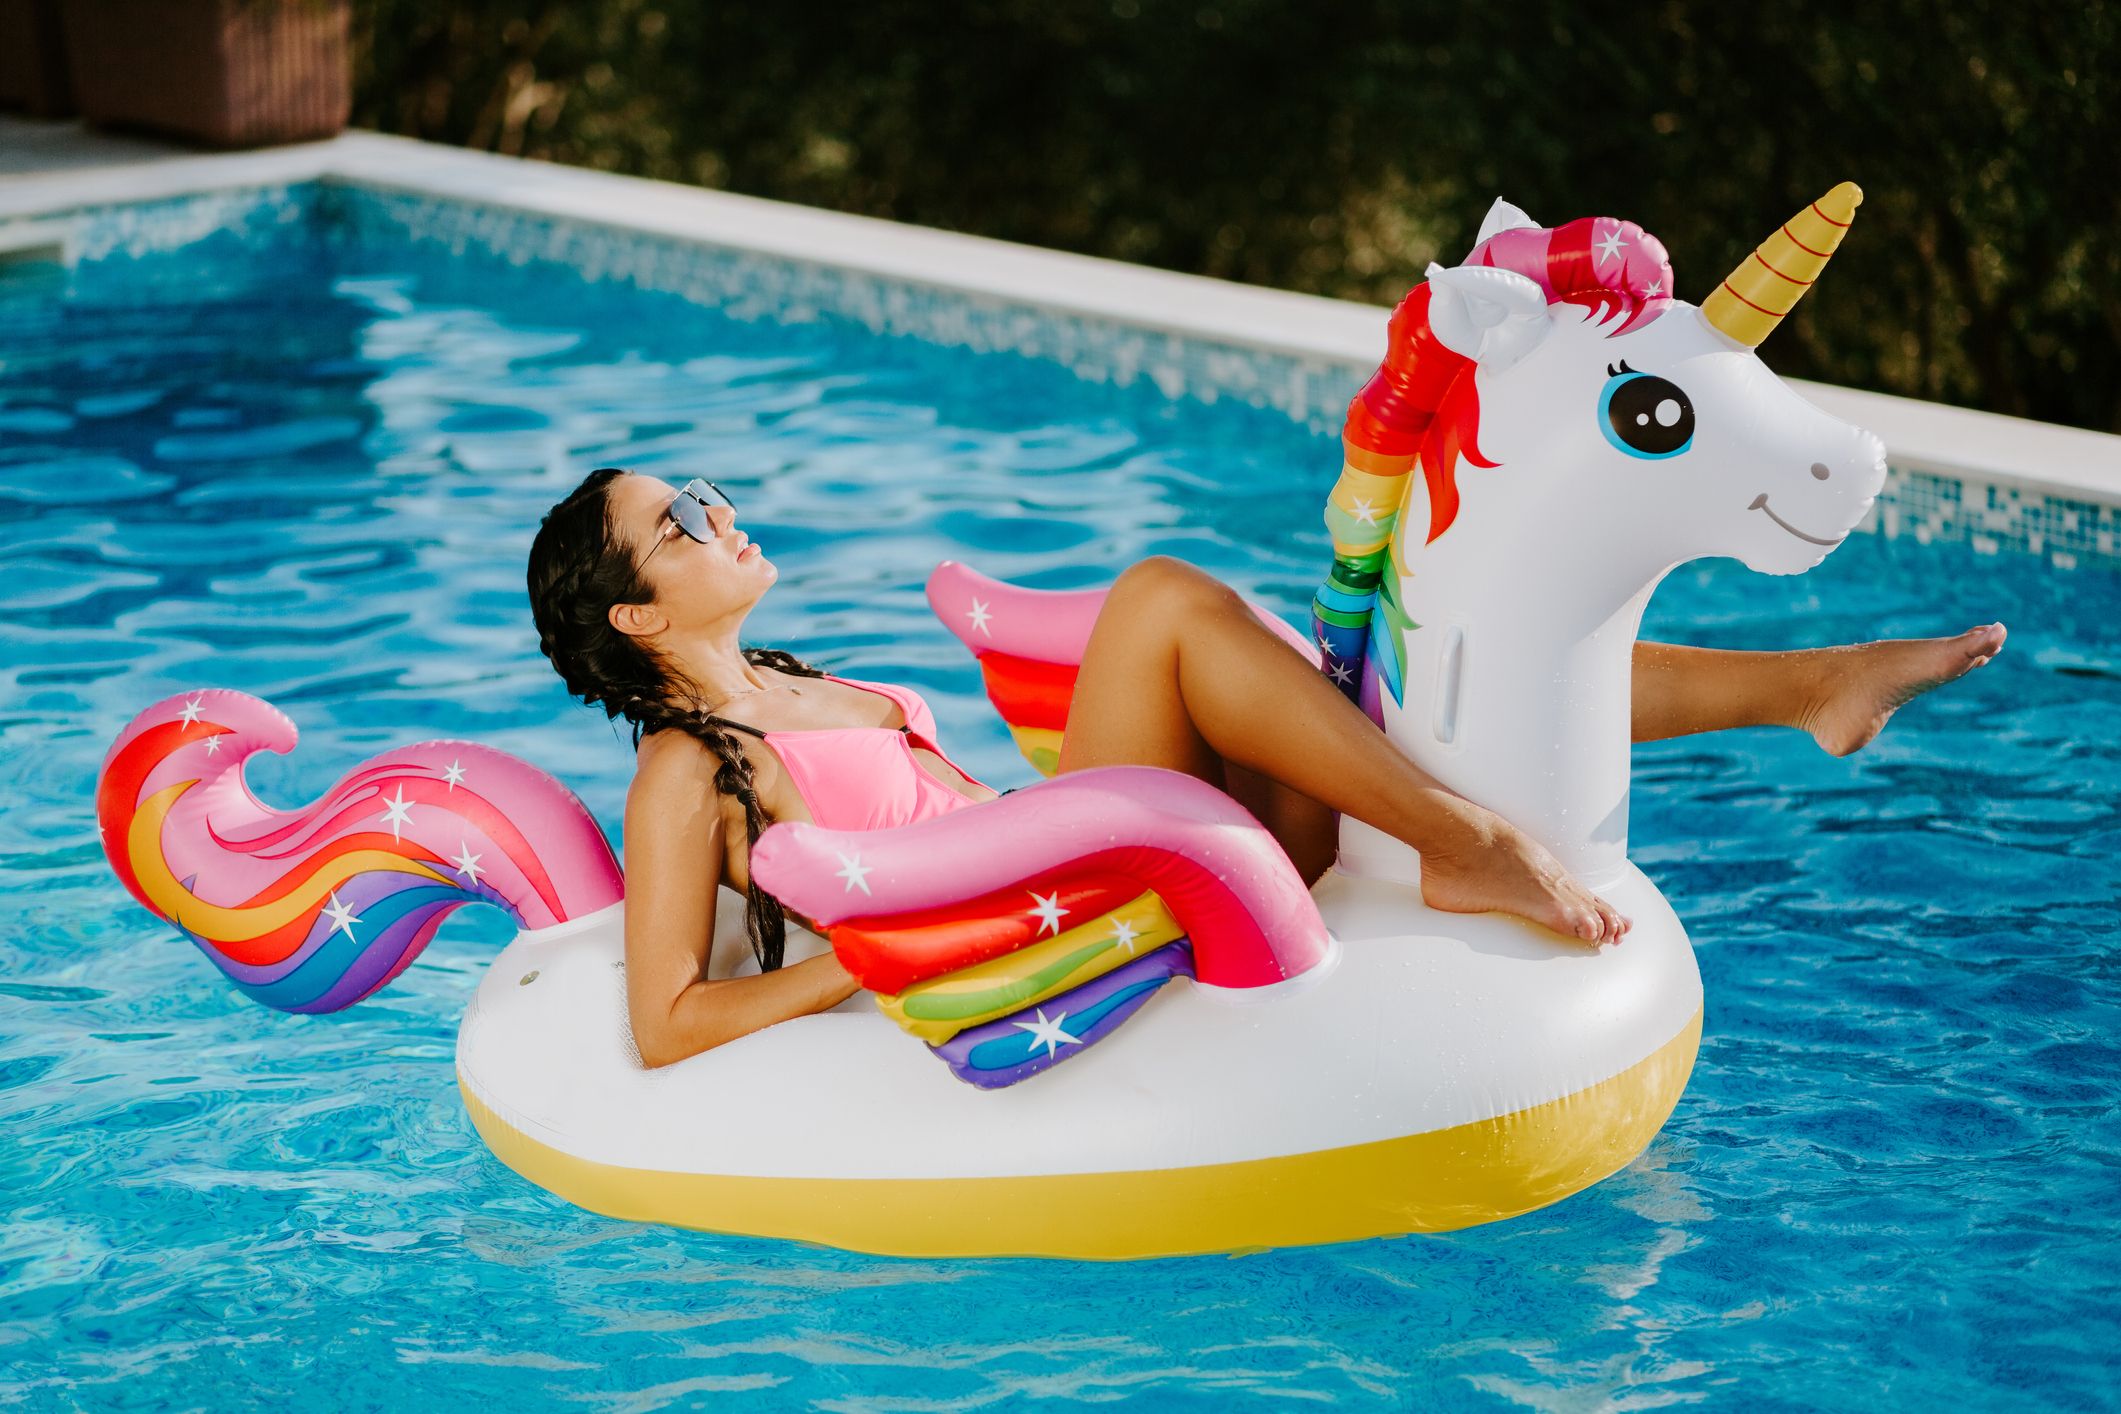 5 Sexual Unicorns on Why They Love Threesomes With Couples